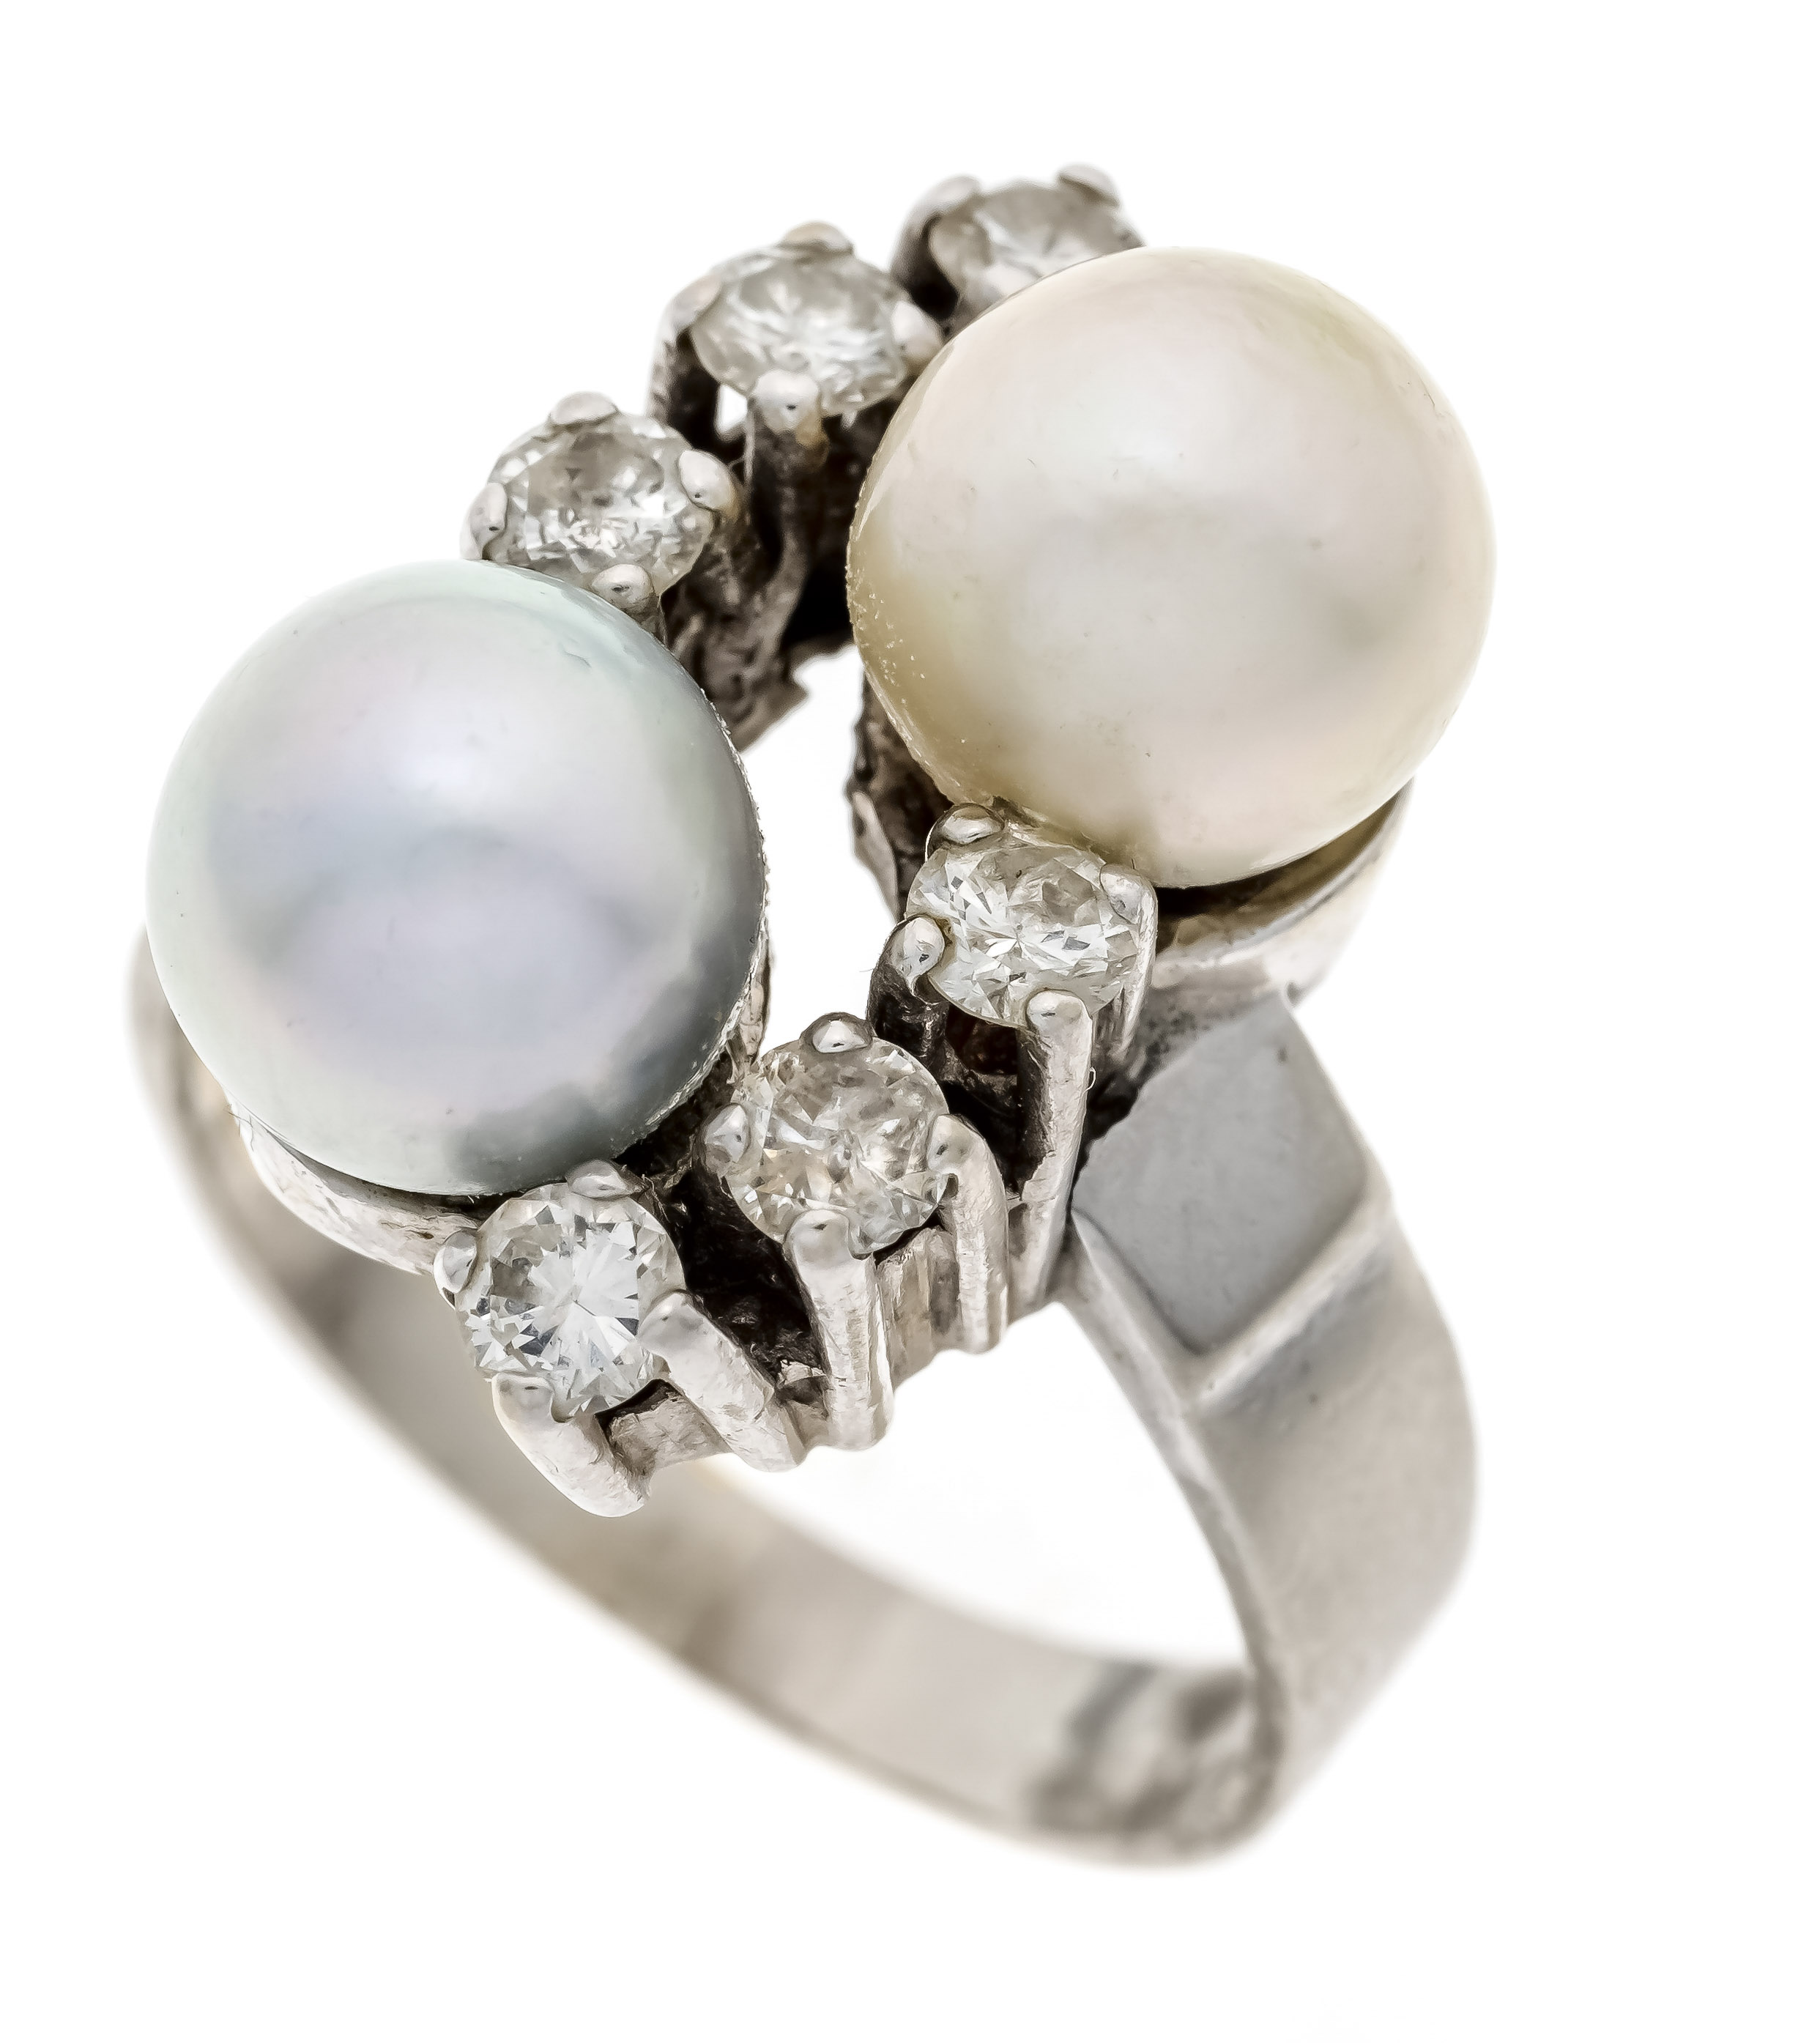 Cultured pearl diamond ring WG 585/000 with one cream-colored and one silver-grey cultured pearl 9.5